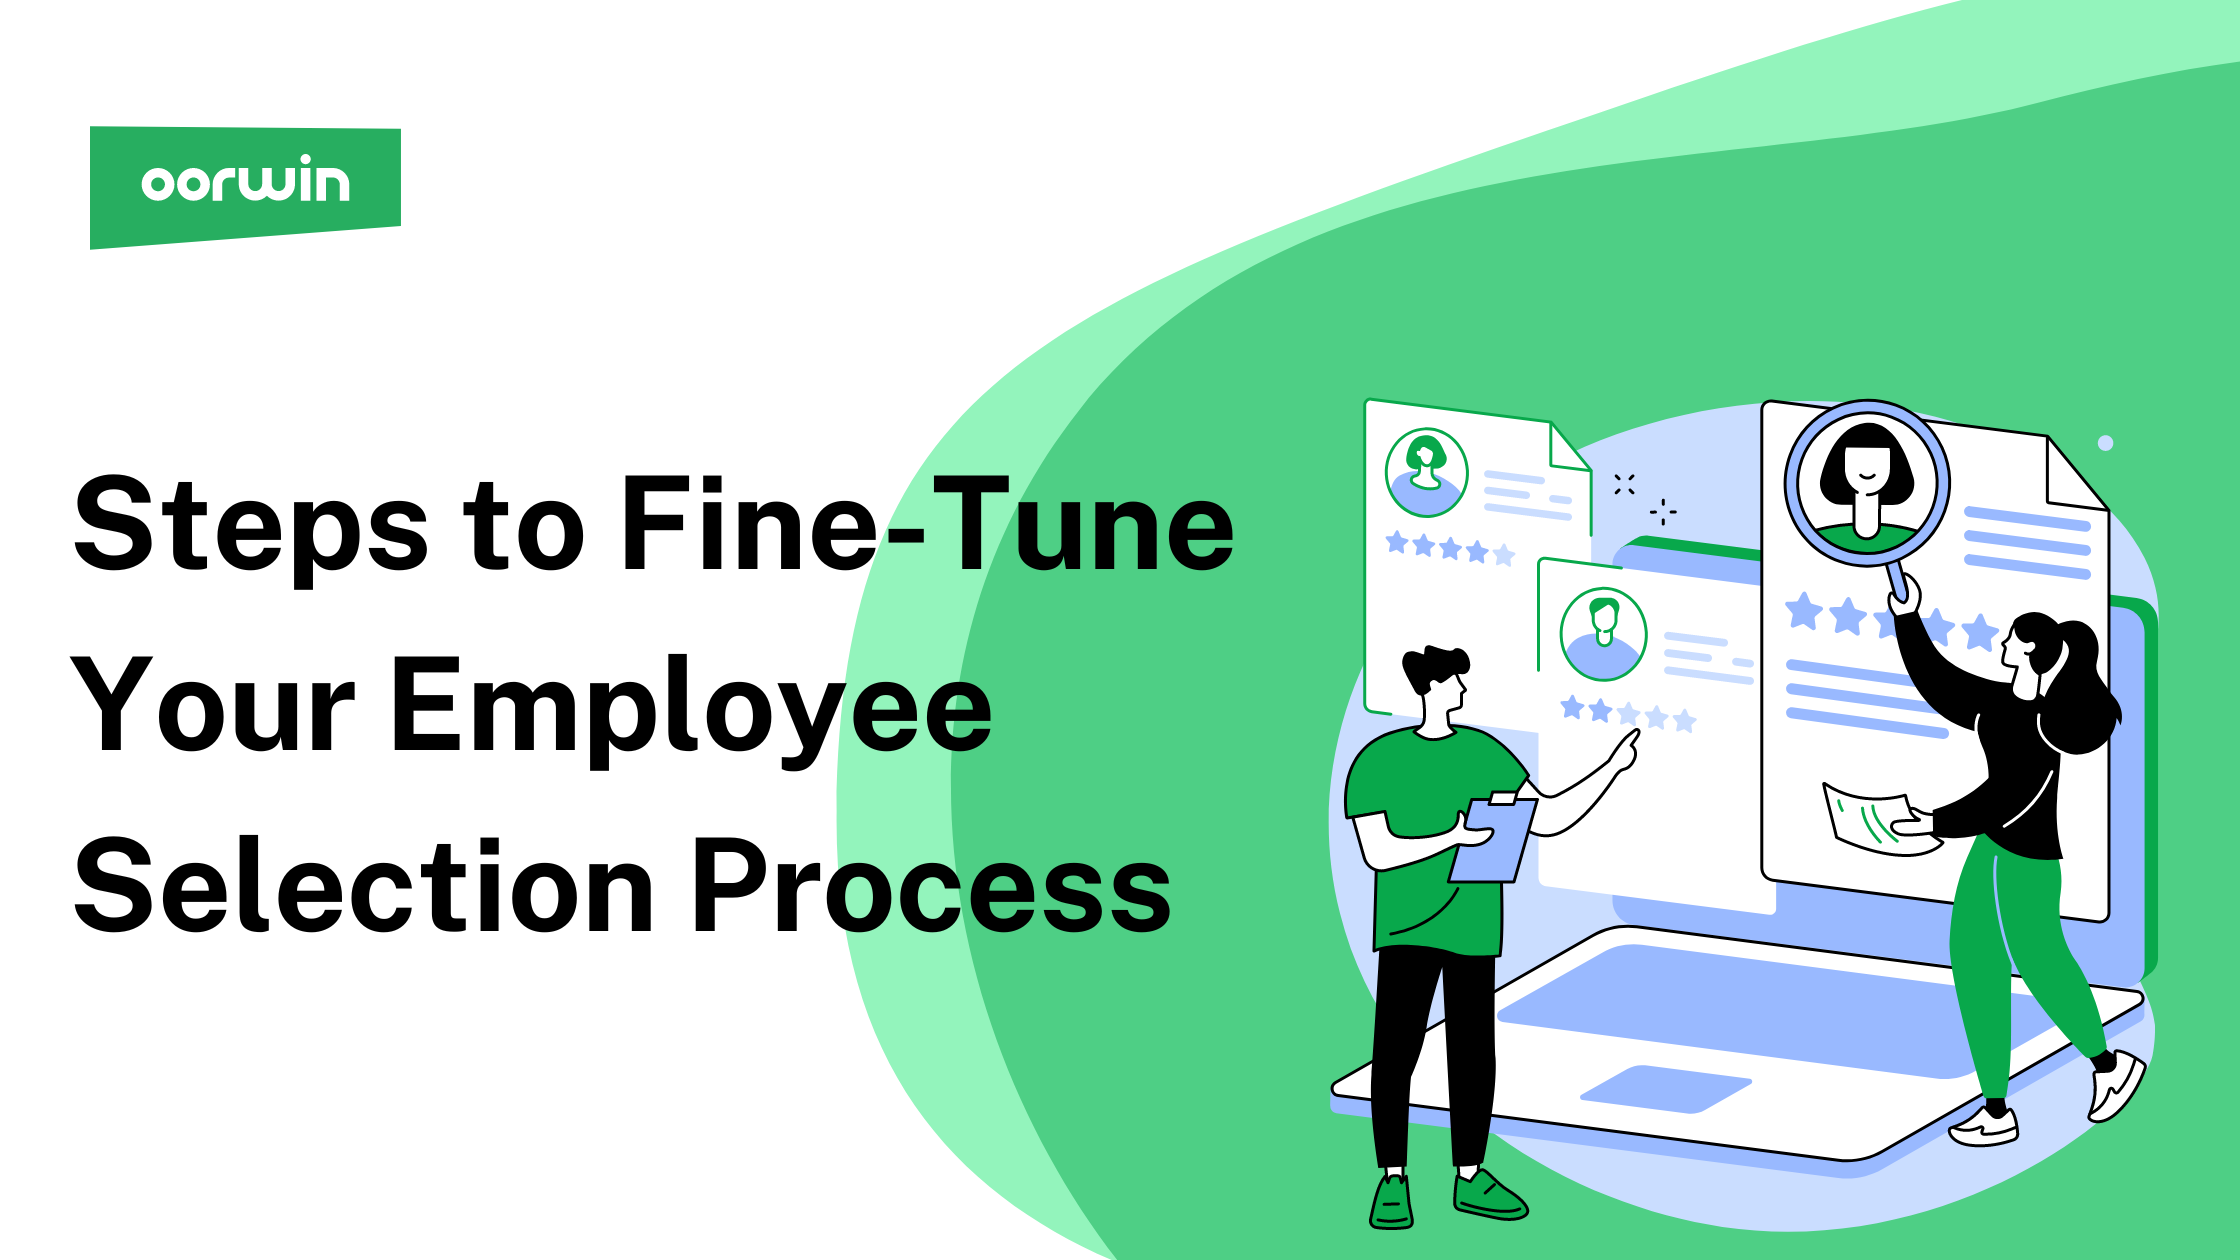 Steps to Fine-Tune Your Employee Selection Process